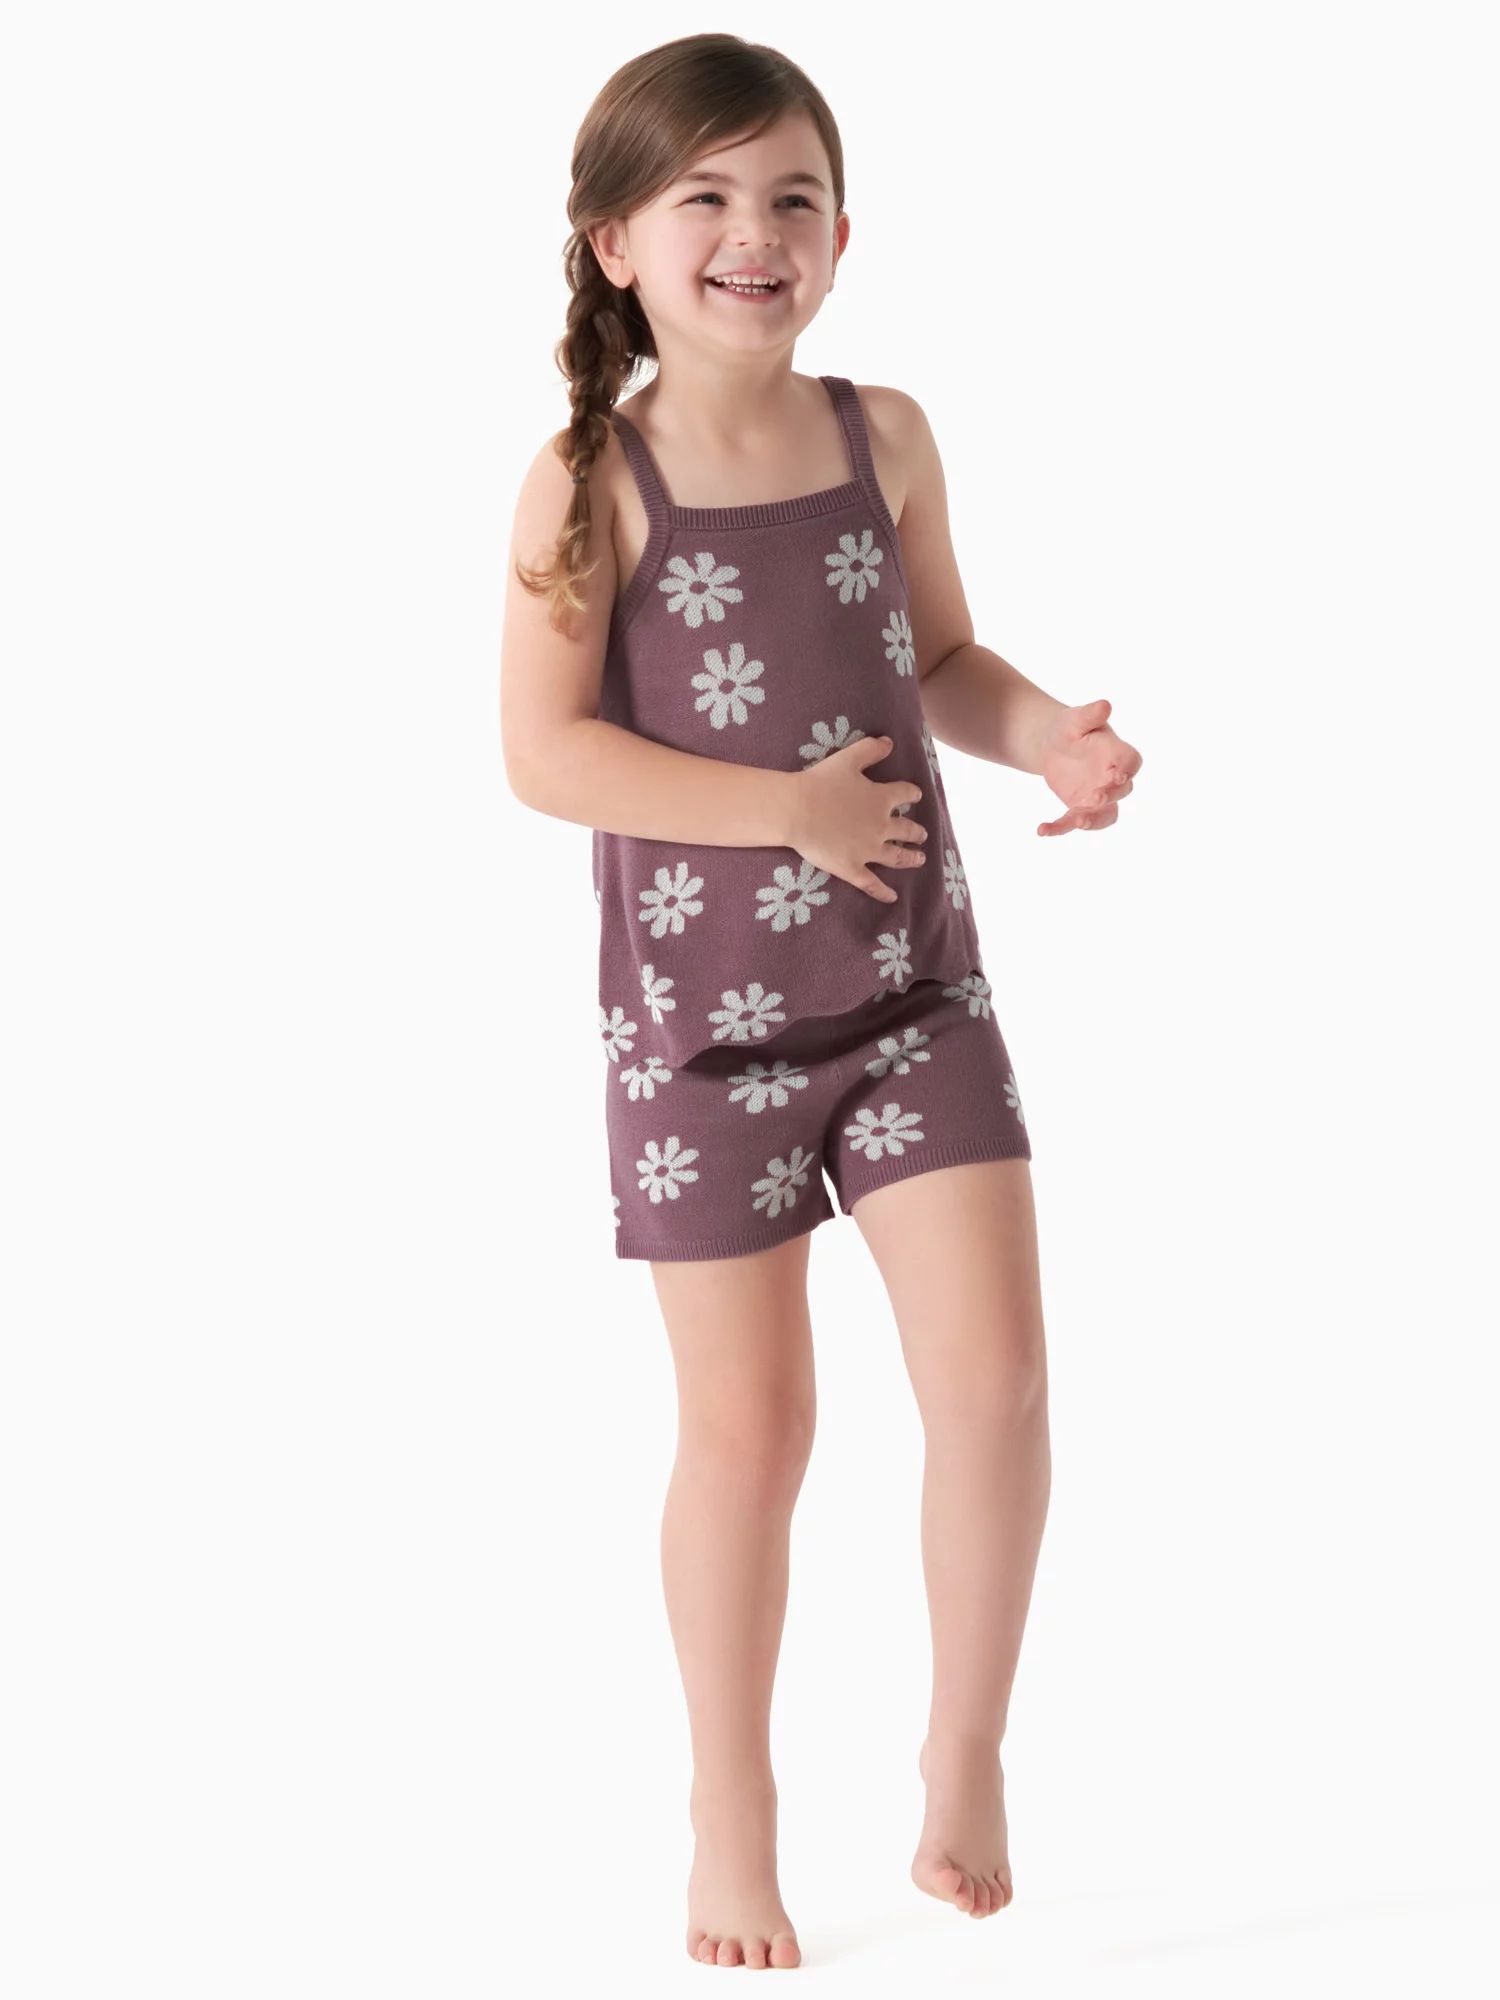 Modern Moments by Gerber Baby and Toddler Girls Tank Top and Shorts Set, 2-Piece, Sizes 12M-5T | Walmart (US)